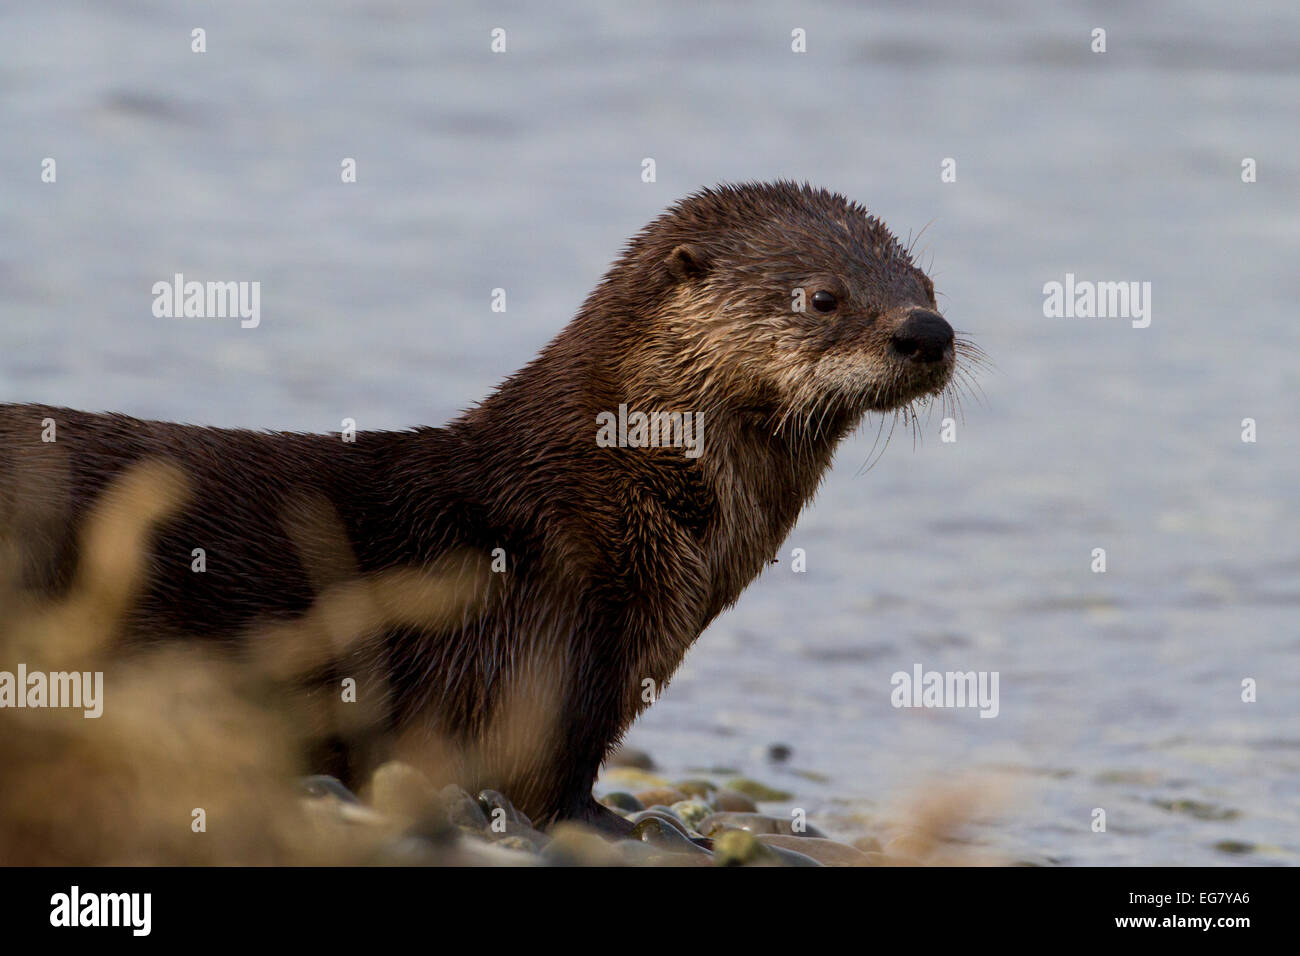 Northern River Otter (Lontra canadensis) looking out to sea along the shoreline at Whiffen Spit, Sooke, BC, Canada in January Stock Photo